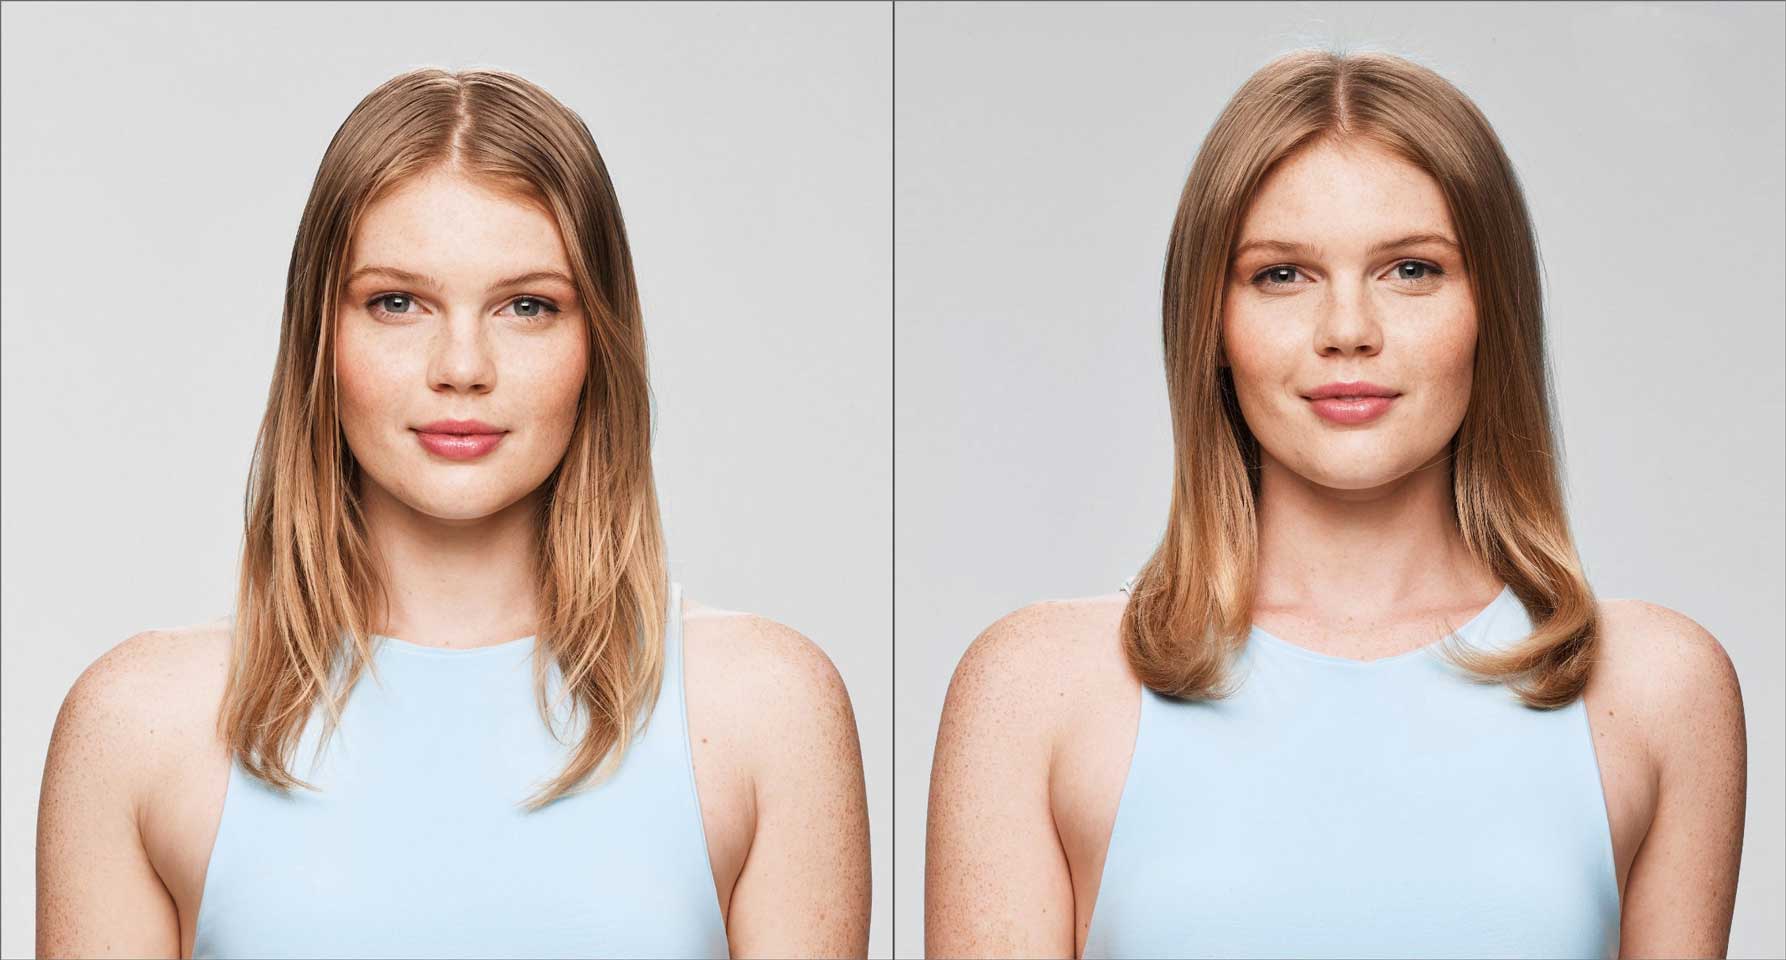 Before and after image of a woman with greasy blonde hair on the left and clean hair on the right. 